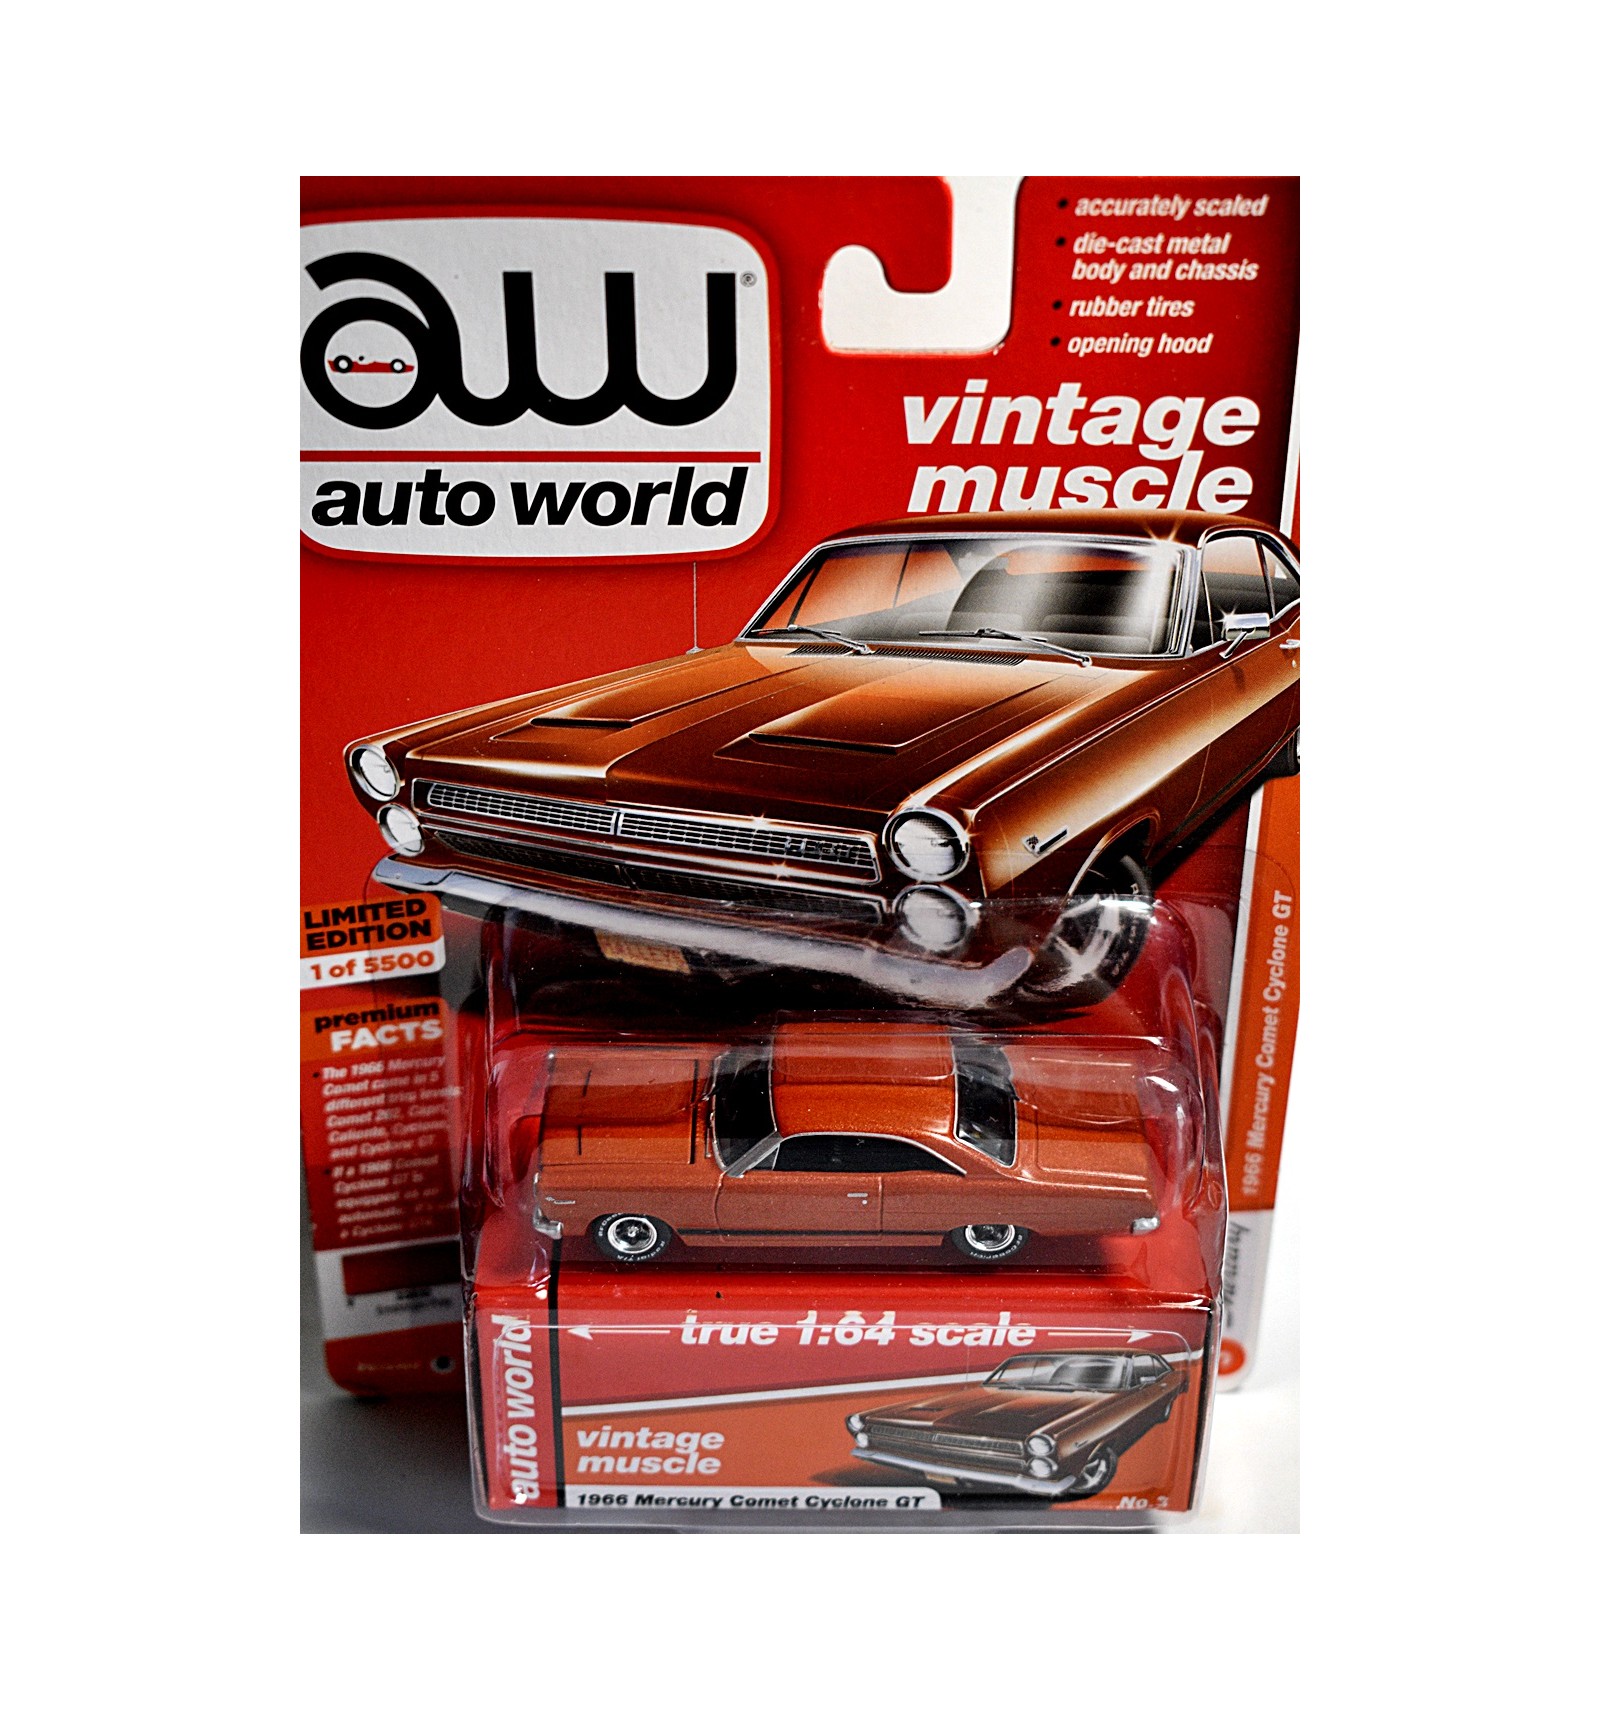 Auto World Ultra Red Chase 1966 Mercury Comet Cyclone GT AW64152A 